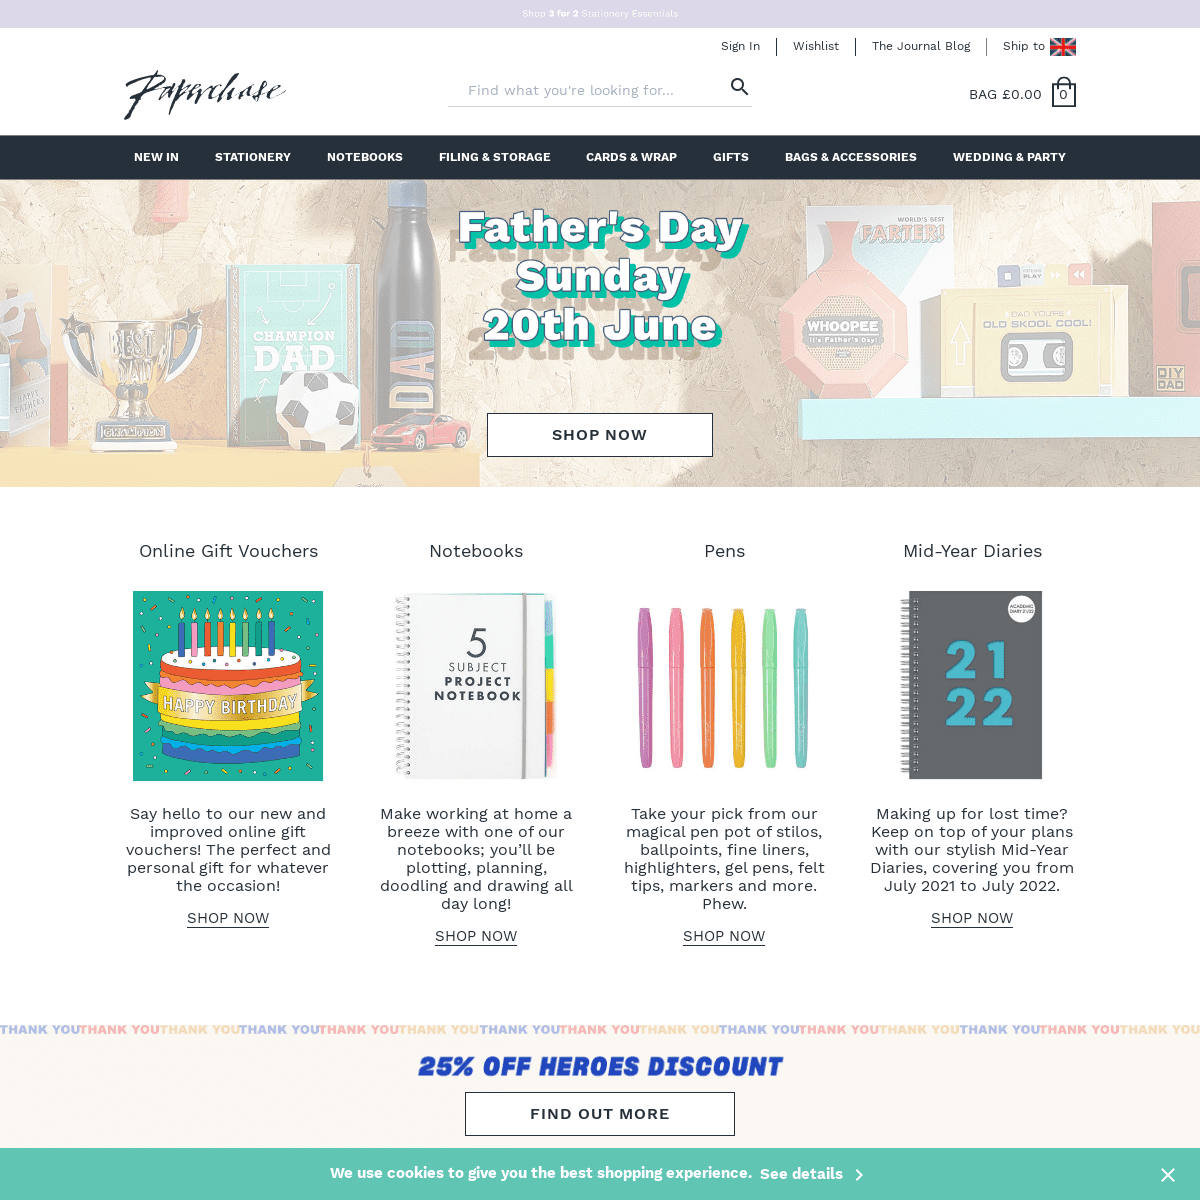 A complete backup of https://paperchase.com